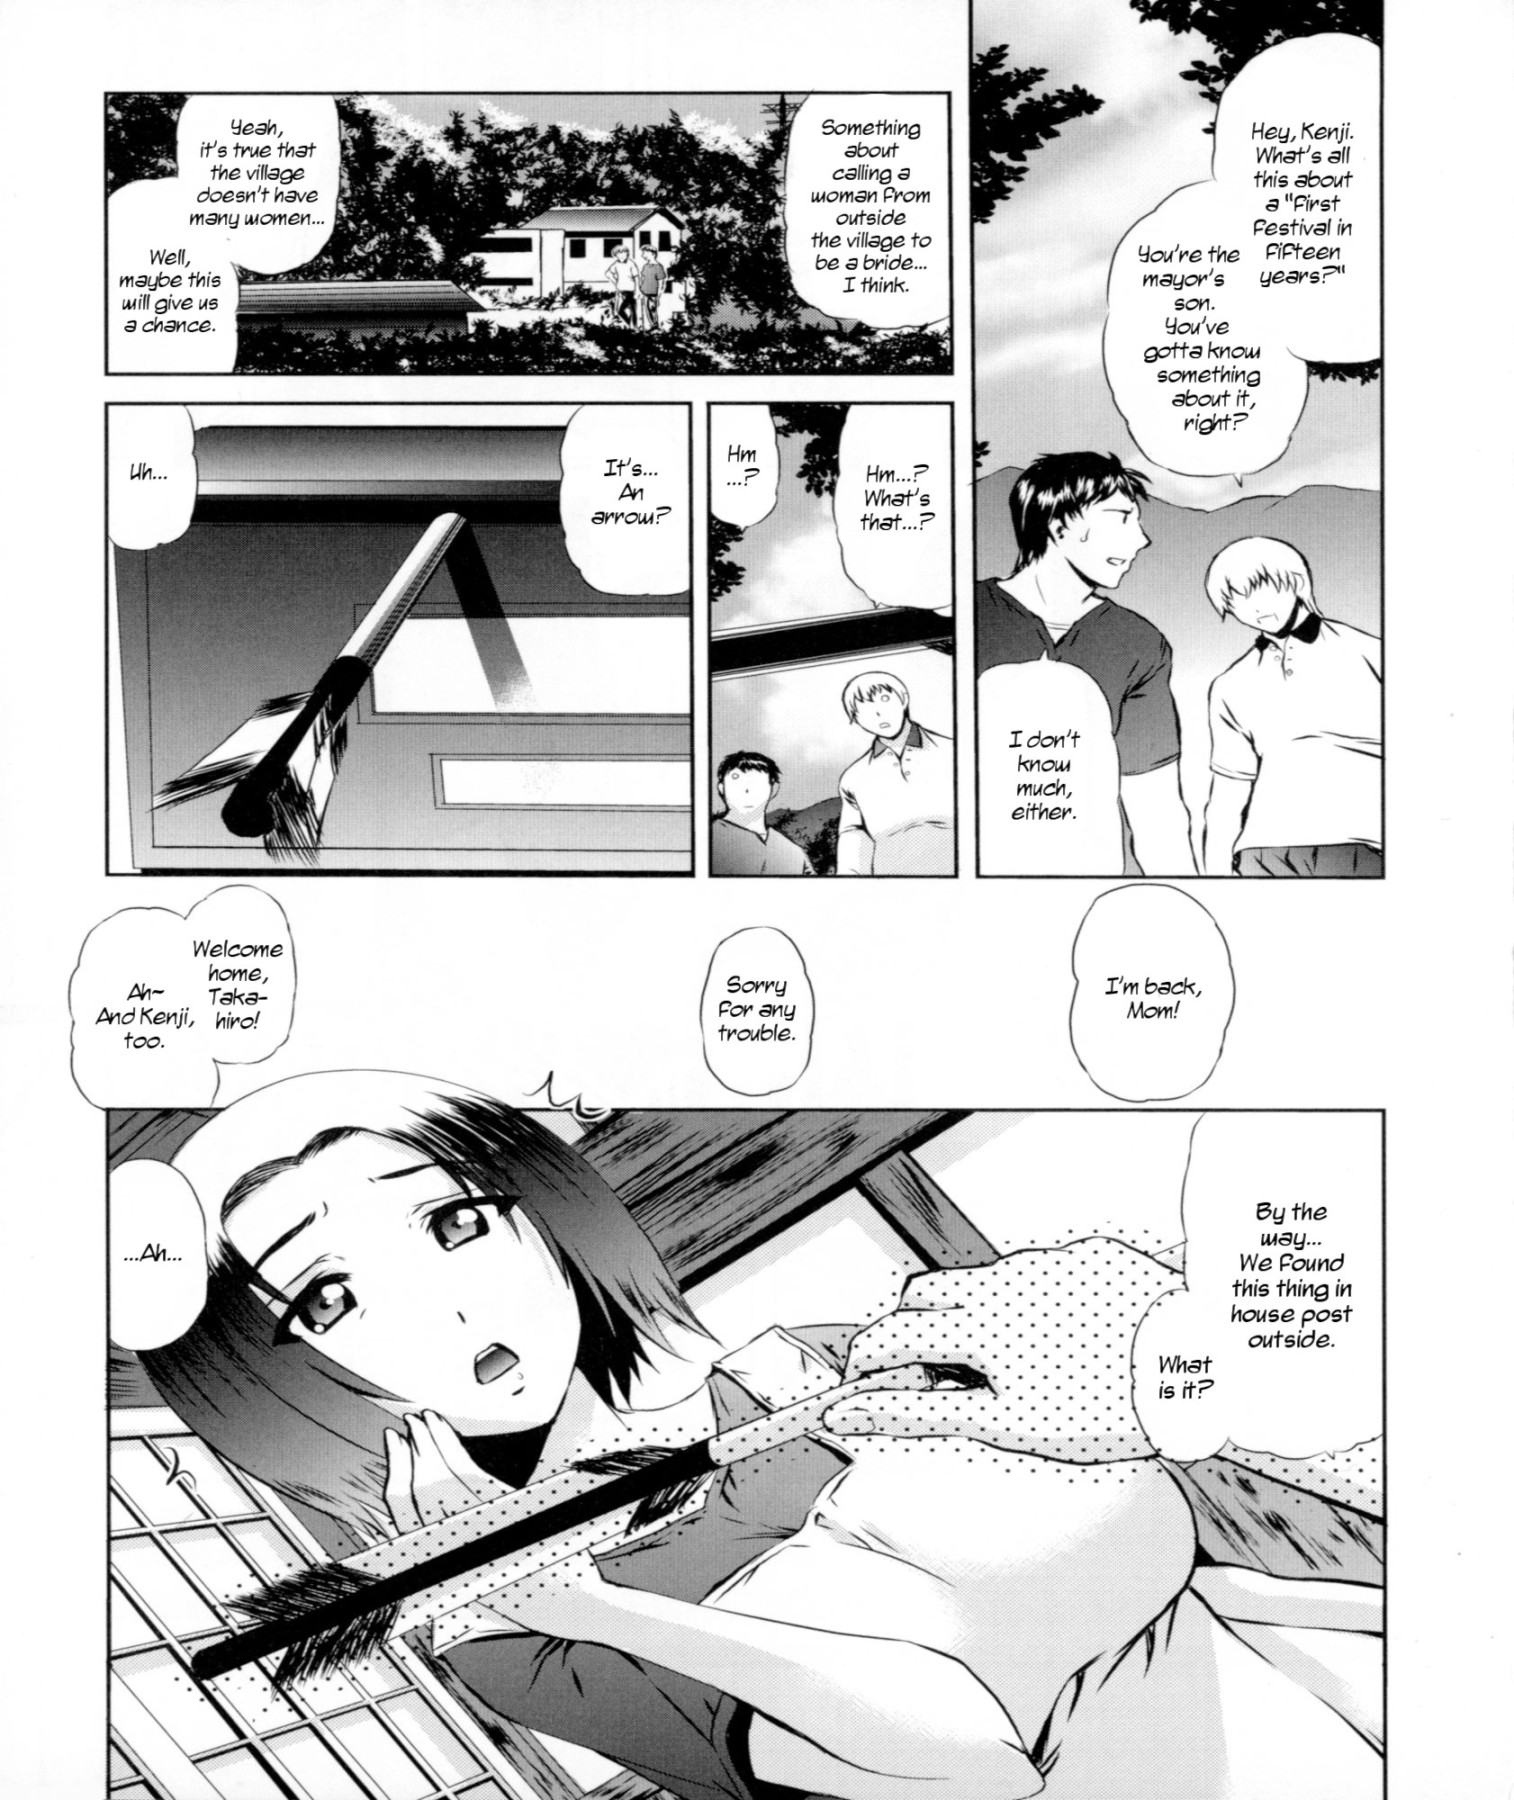 Hentai Manga Comic-Tradition of the Changing of the Bride-Read-1